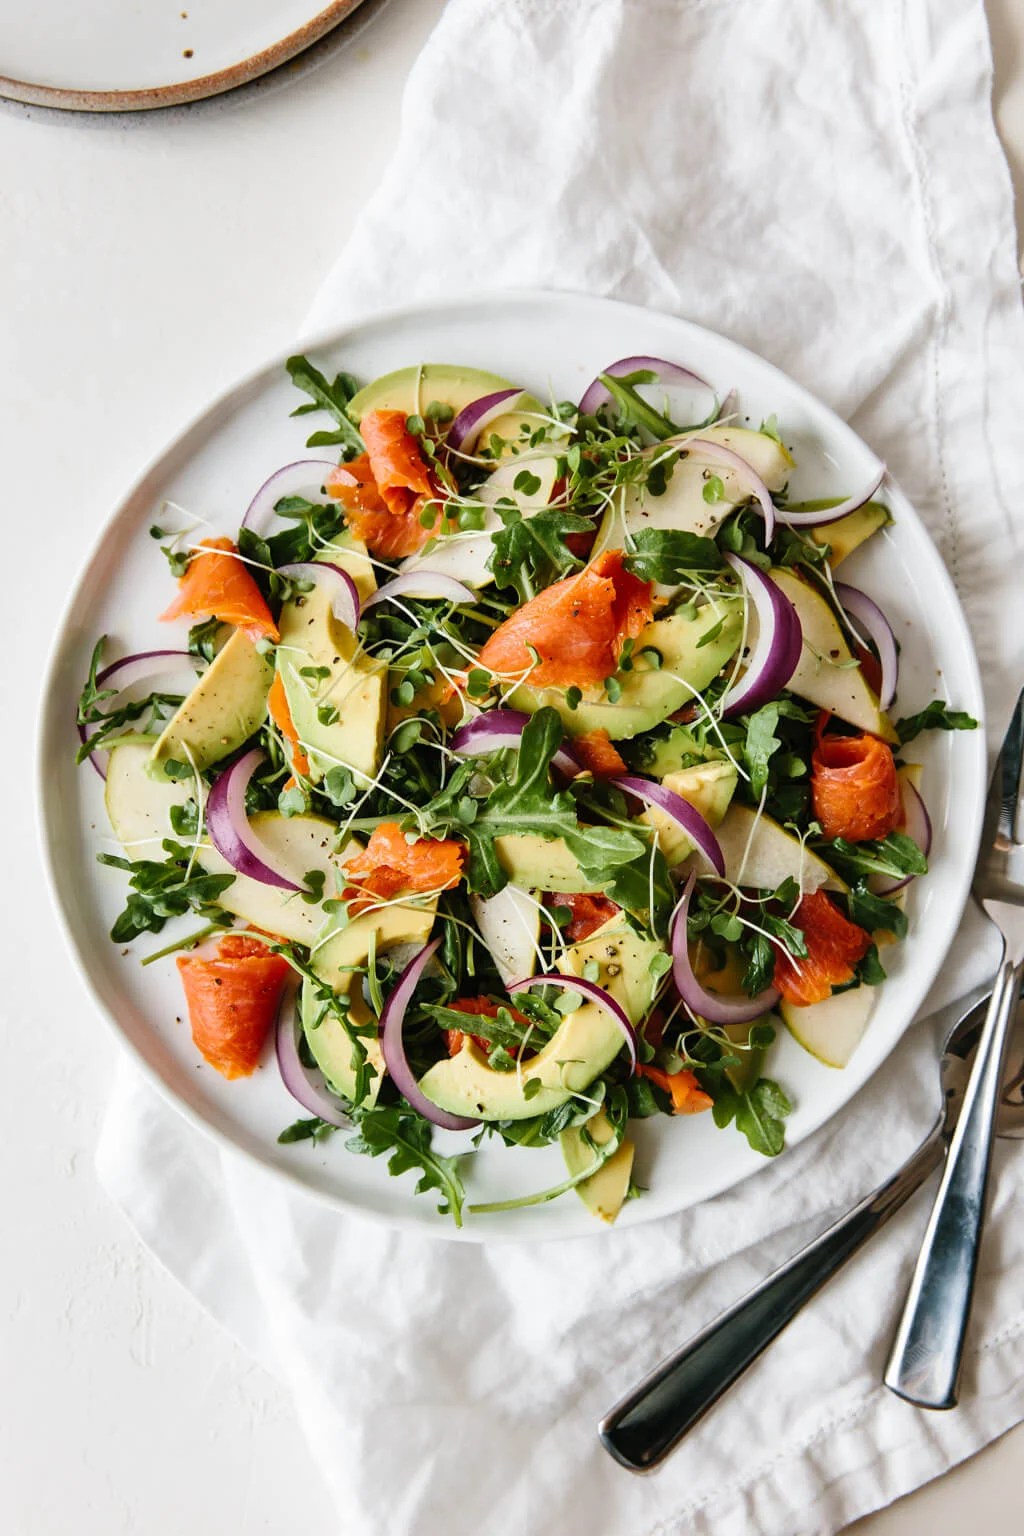 An easy and delicious arugula salad recipe made with baby arugula, smoked salmon, avocado, pear and red onion.